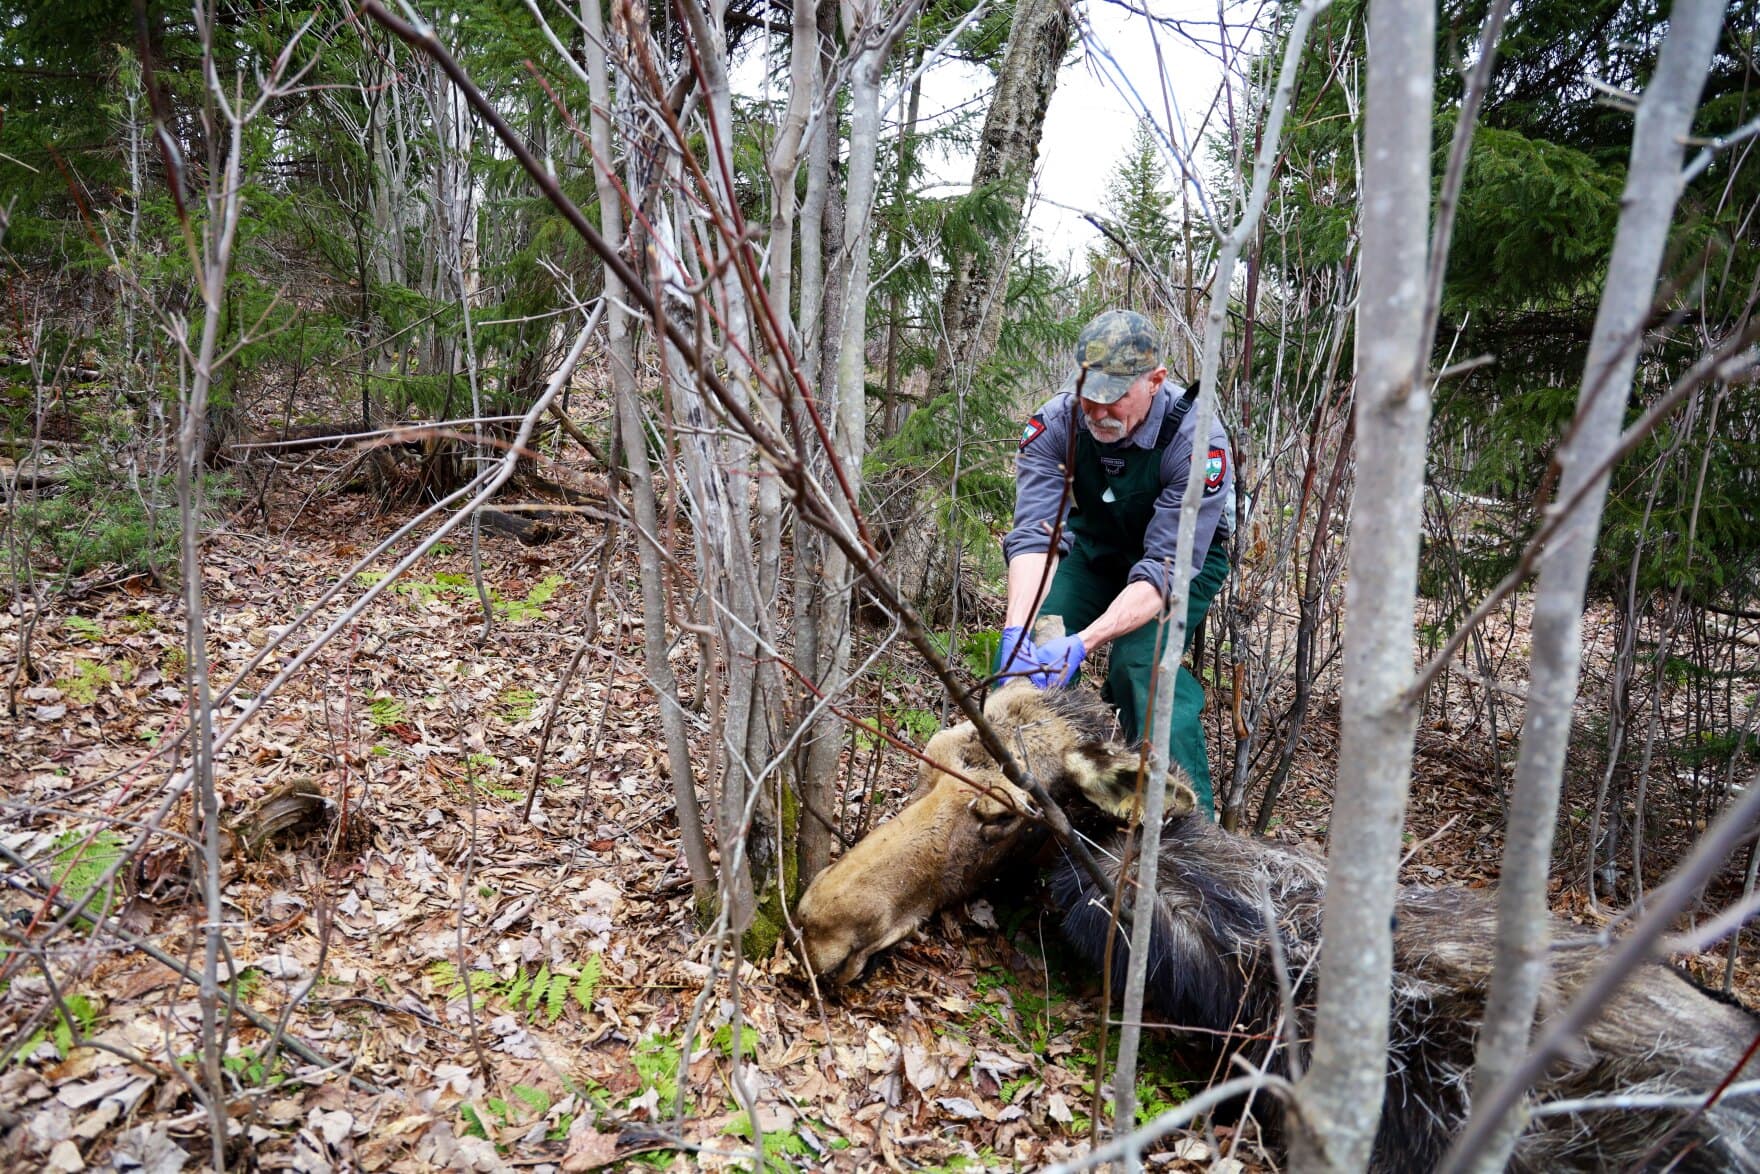 State biologist Lee Kantar examines a dead moose on April 26, 2022. Moose Number 59 was captured and fitted with a radio collar in the winter of 2014. The moose showed signs of anemia, which Kantar says means she had been fed on by ticks and had extreme blood loss. (Esta Pratt-Kielley/Maine Public)